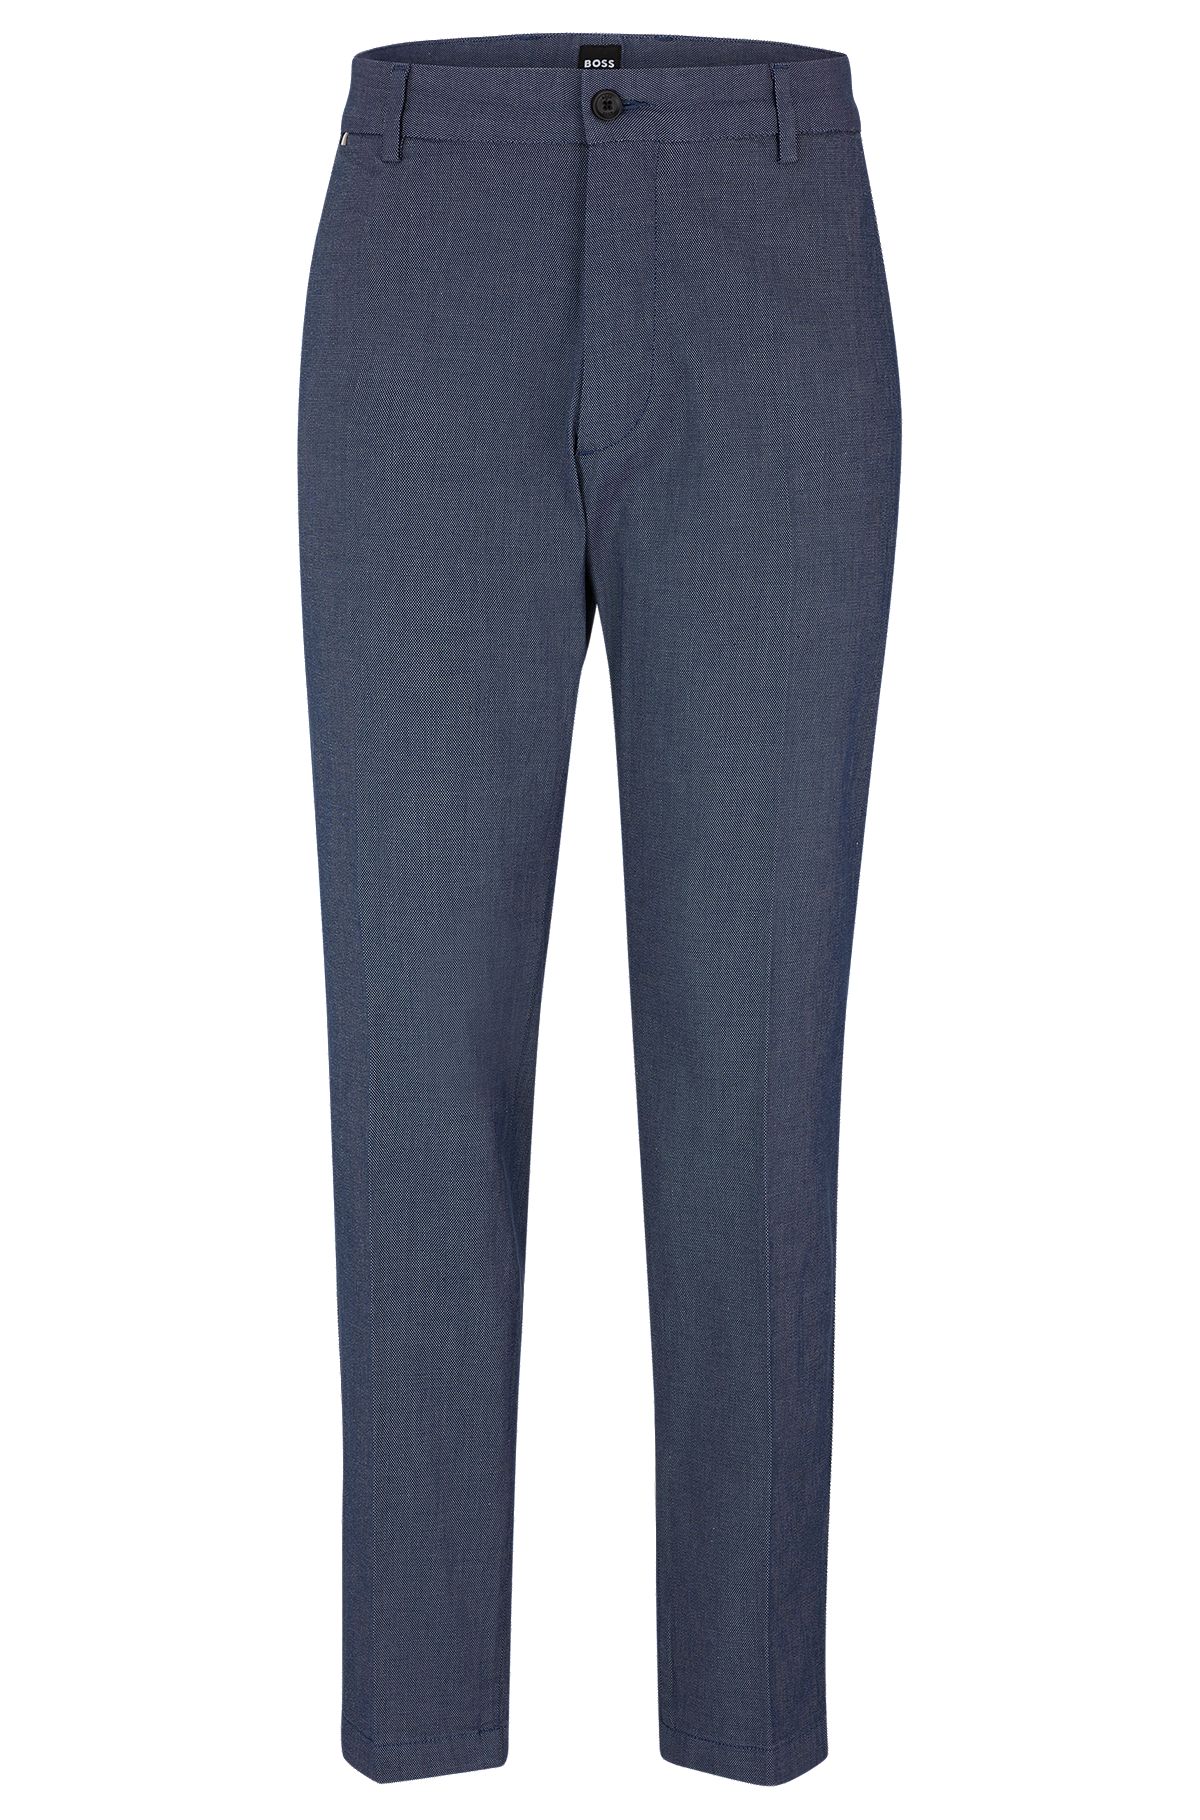 Regular-fit trousers in patterned stretch cotton, Light Blue